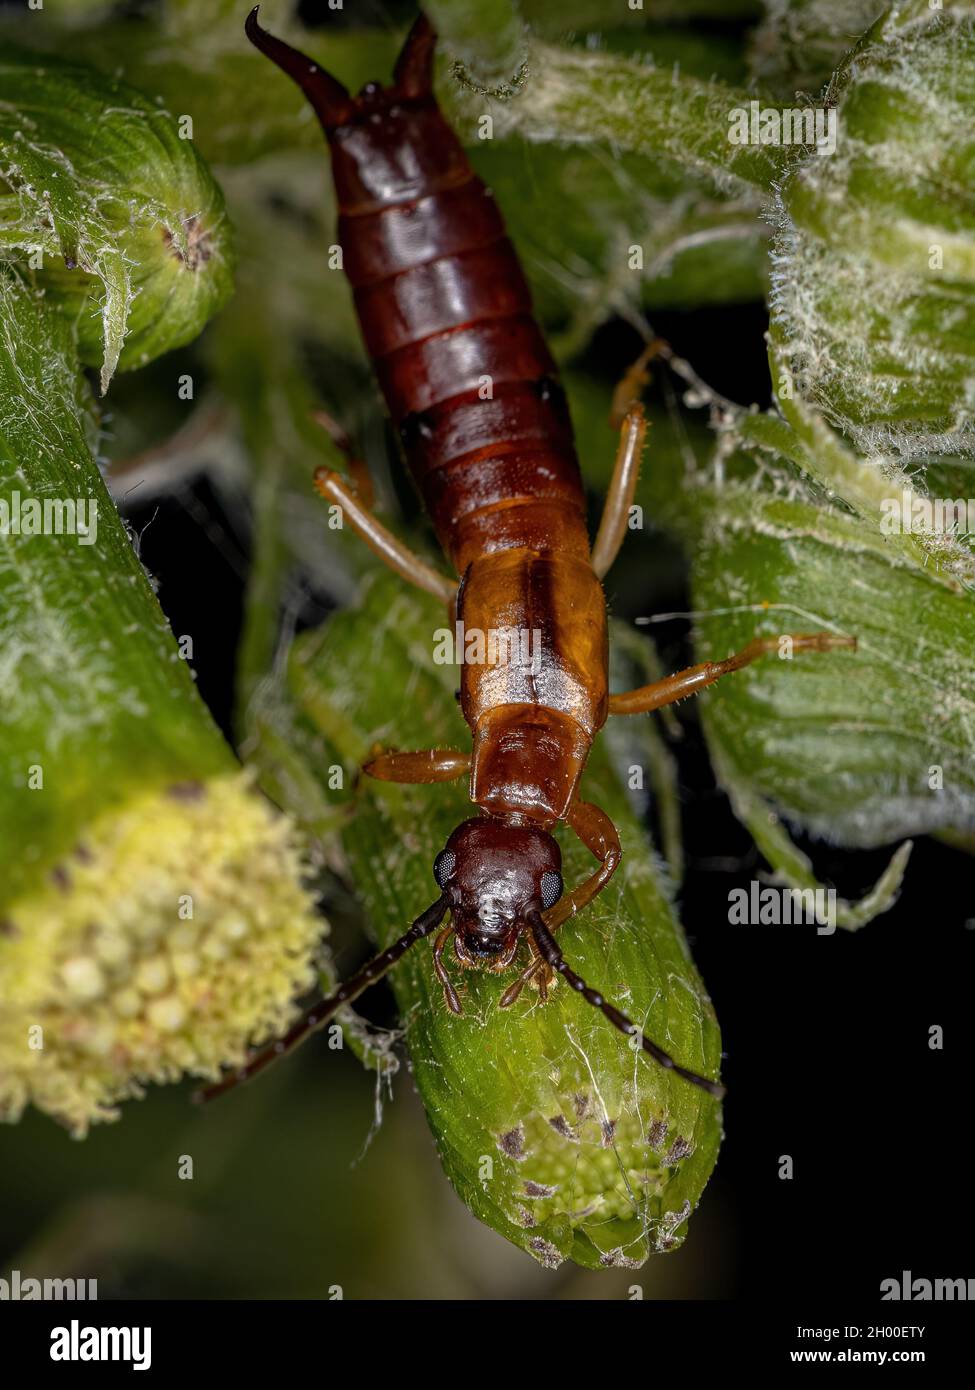 Adult Common Earwig of the Family Forficulidae Stock Photo